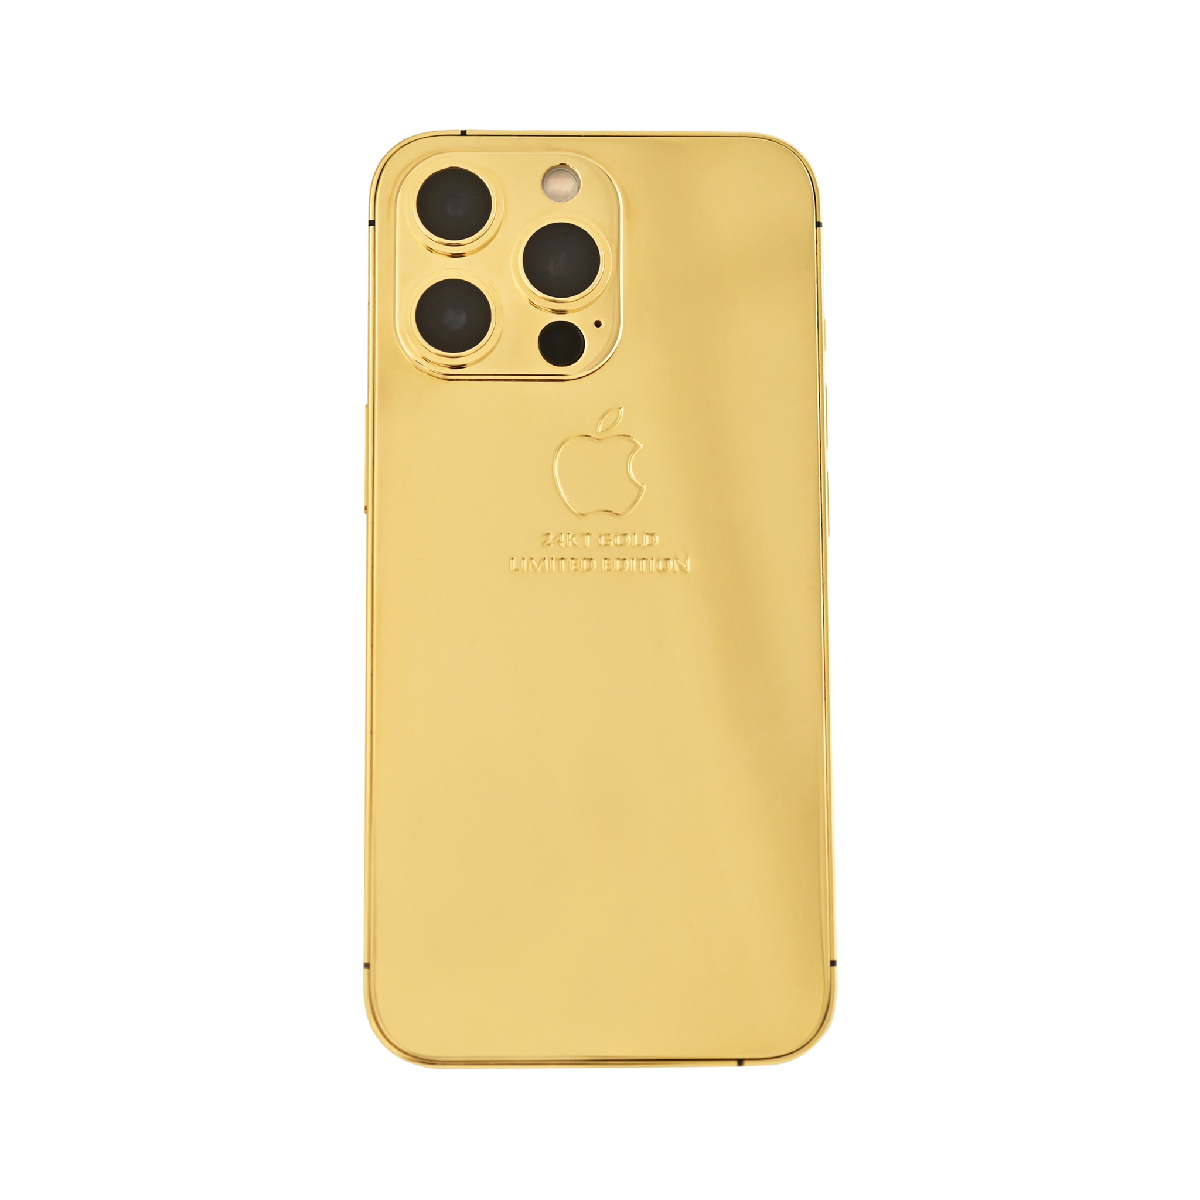 Caviar Luxury 24k Full Gold Customized iPhone 14 Pro 512 GB Limited Edition